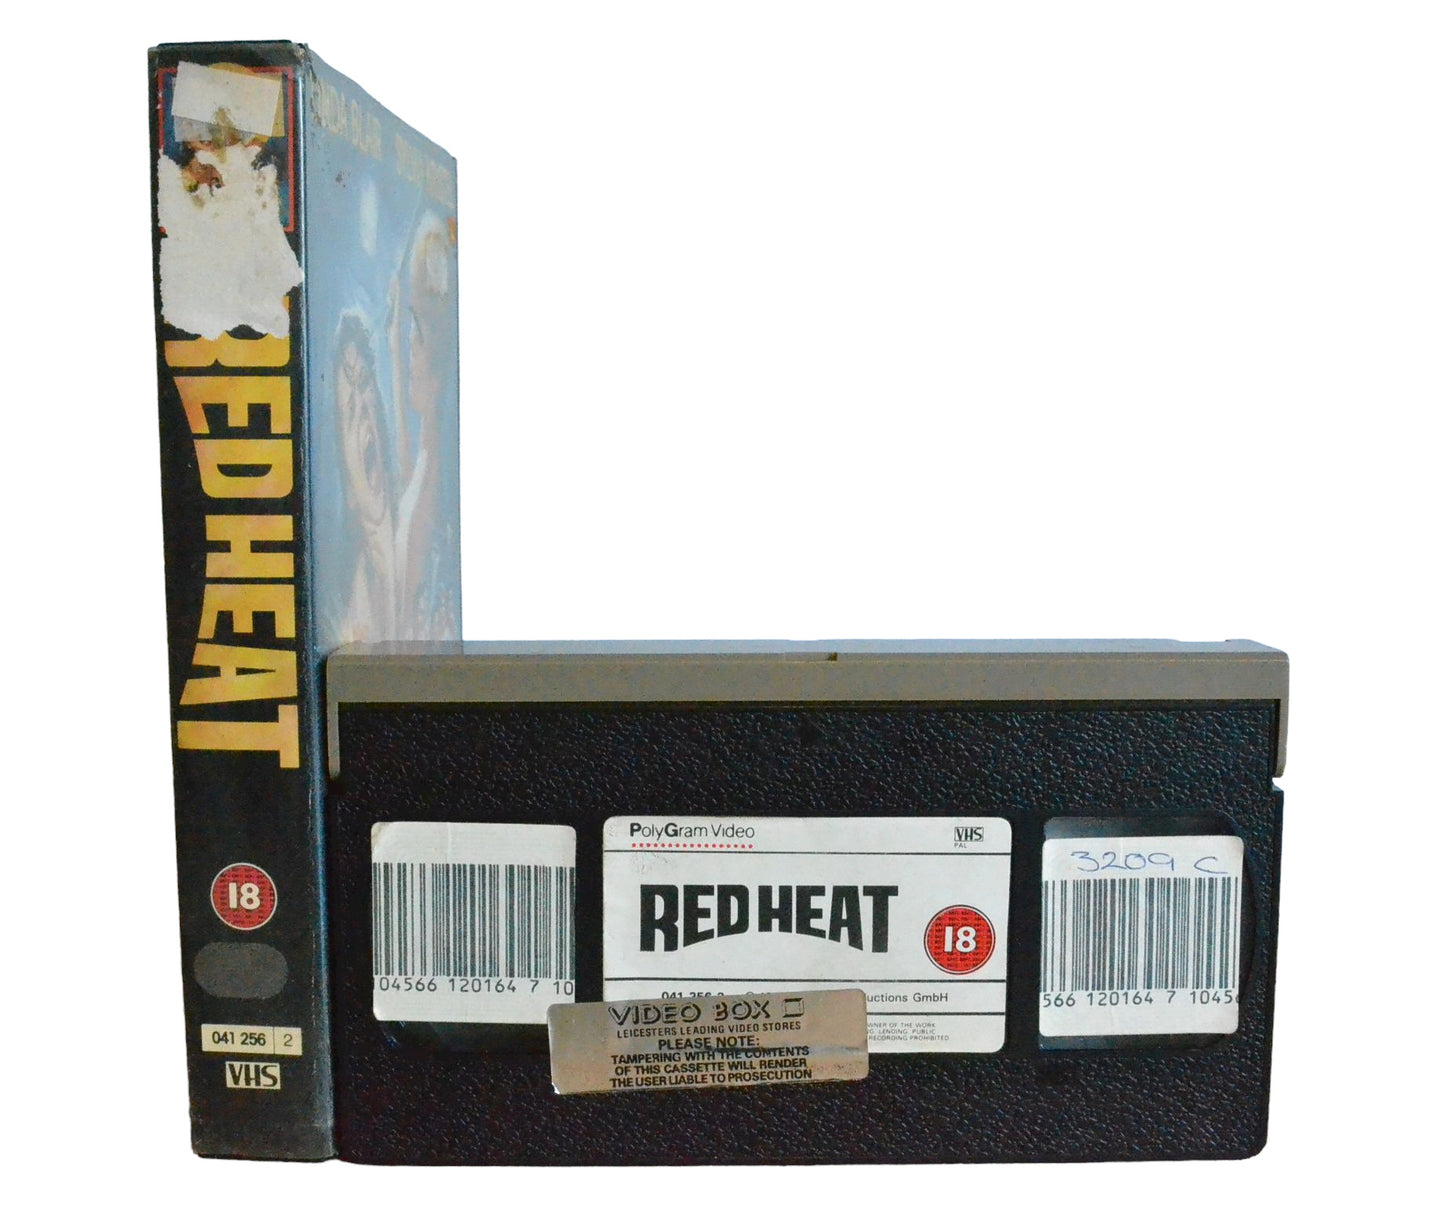 RED HEAT (Passions In This Hot-House Of Hell!) - Linda Blair - PolyGram Video - Large Box - PAL - VHS-